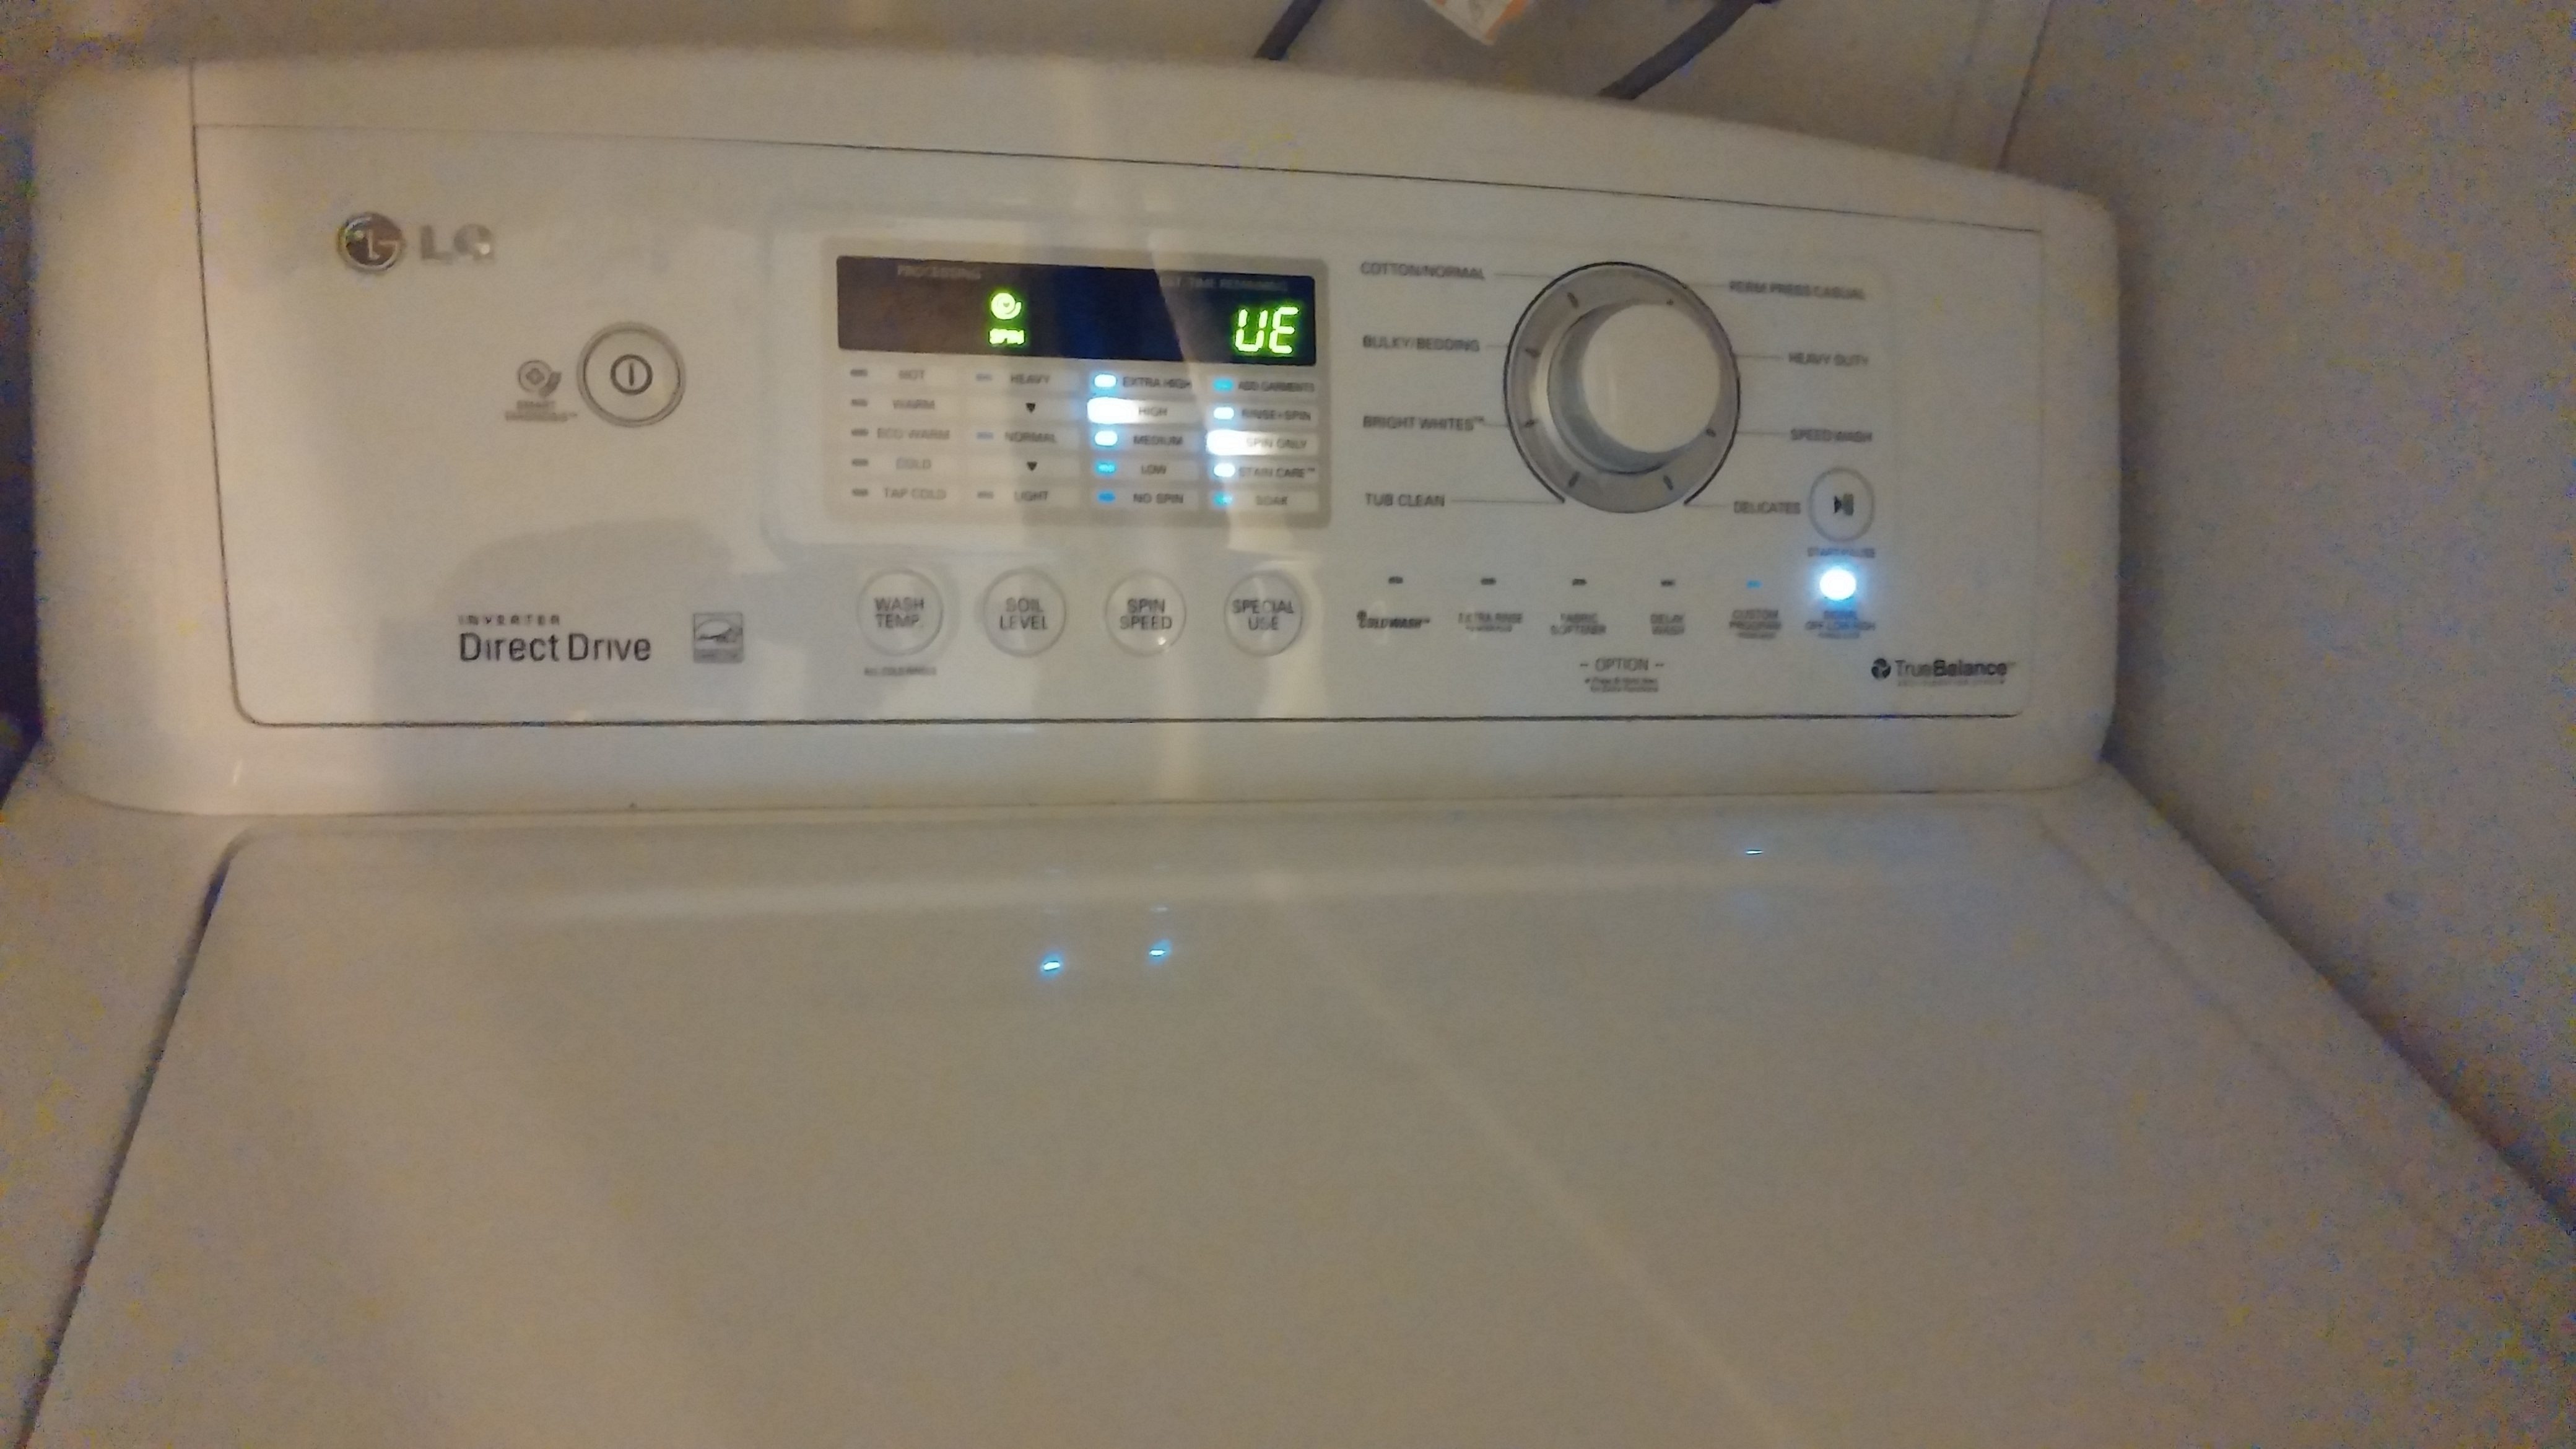 Top 1,843 Complaints and Reviews about LG Washing Machines ...